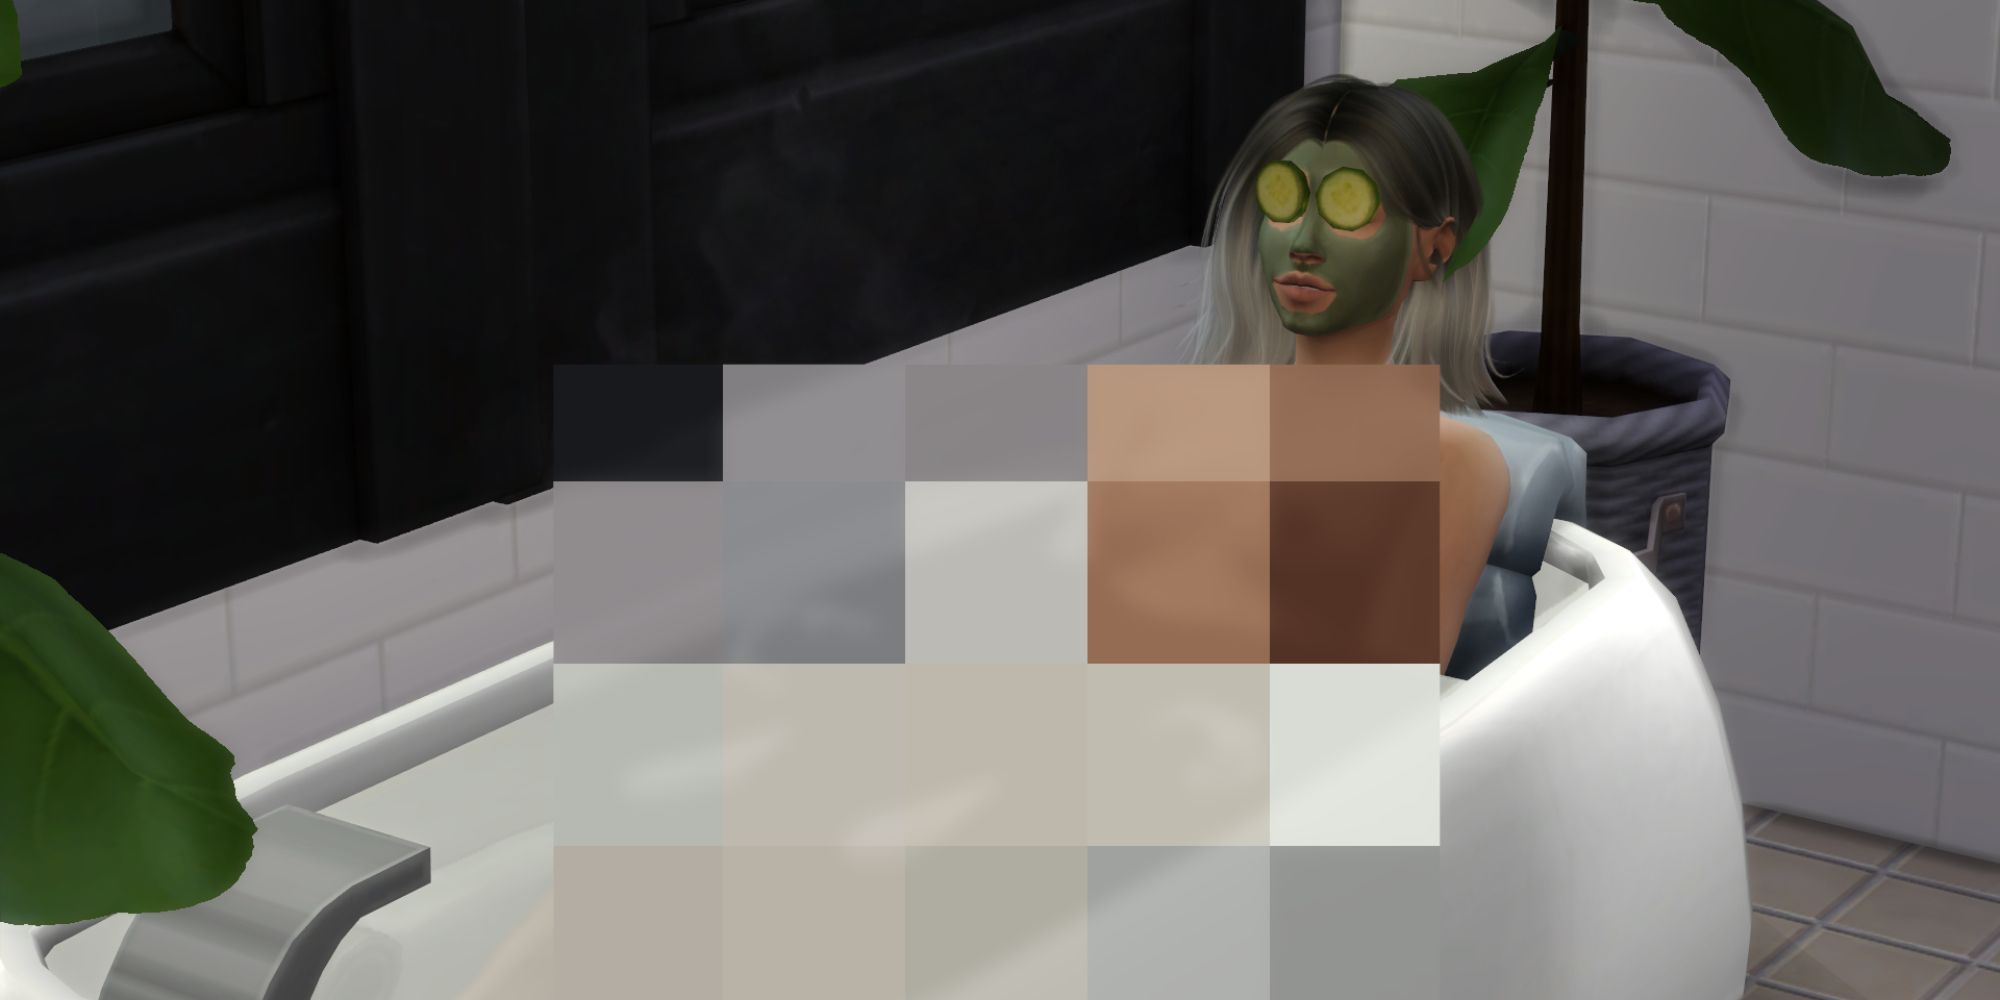 A Sim taking a bath with soaks, a face mask and cucumbers over her eyes